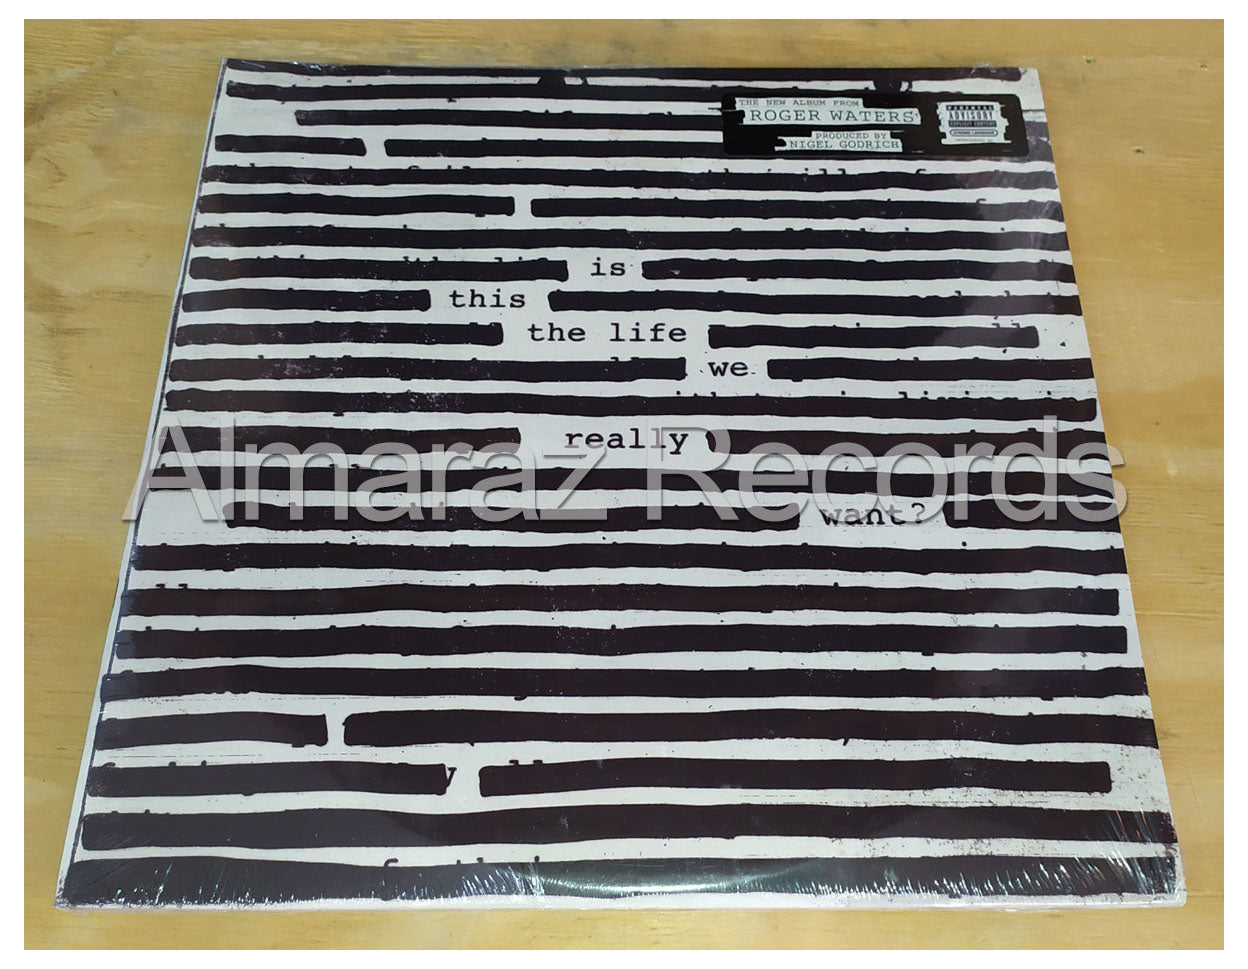 Roger Waters Is This The Life We Really Want? Vinyl LP